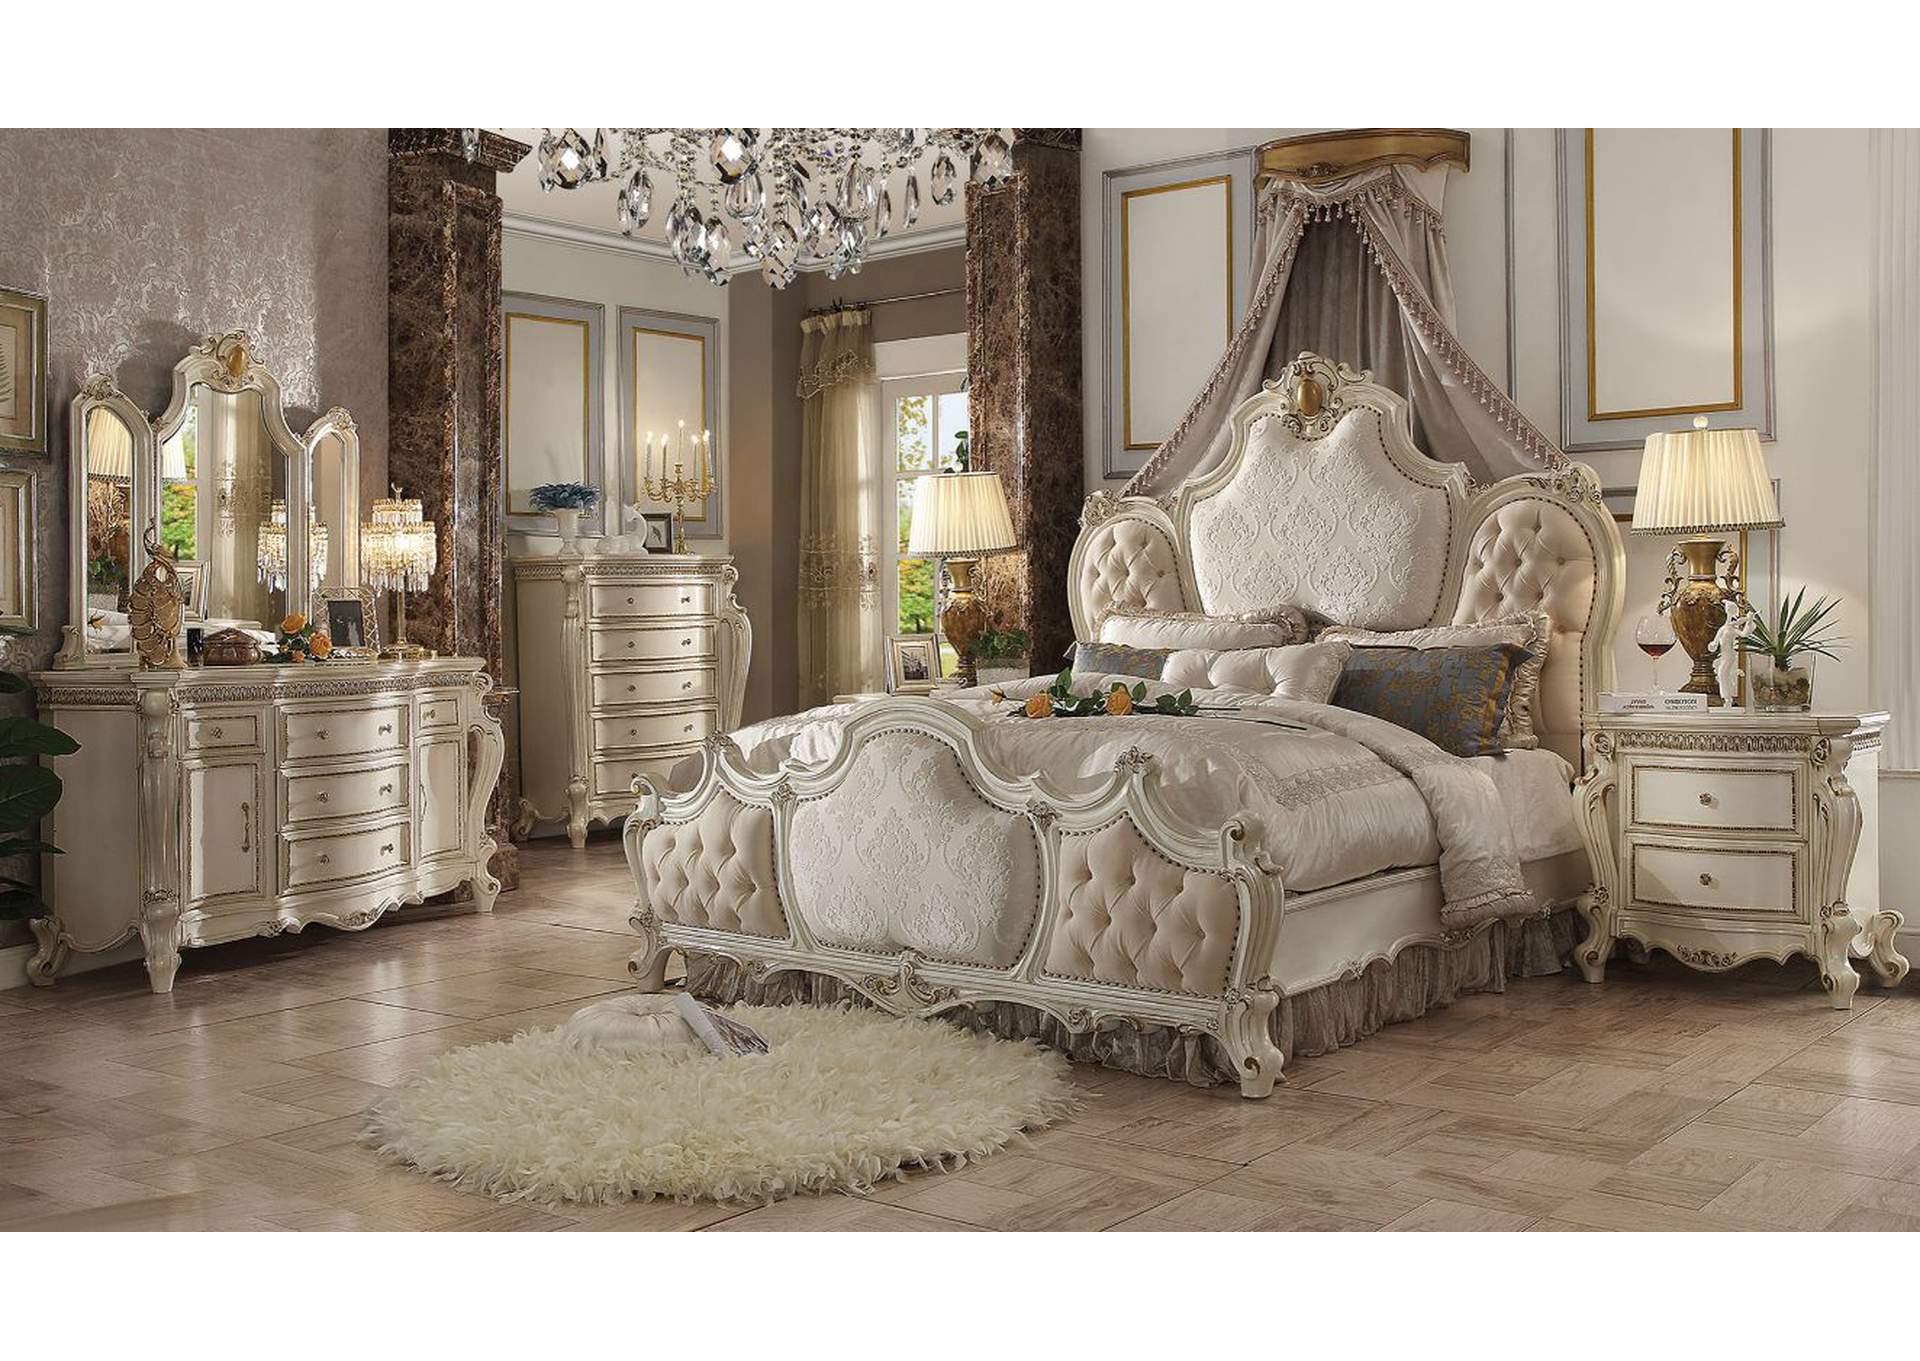 Picardy Queen Bed,Acme